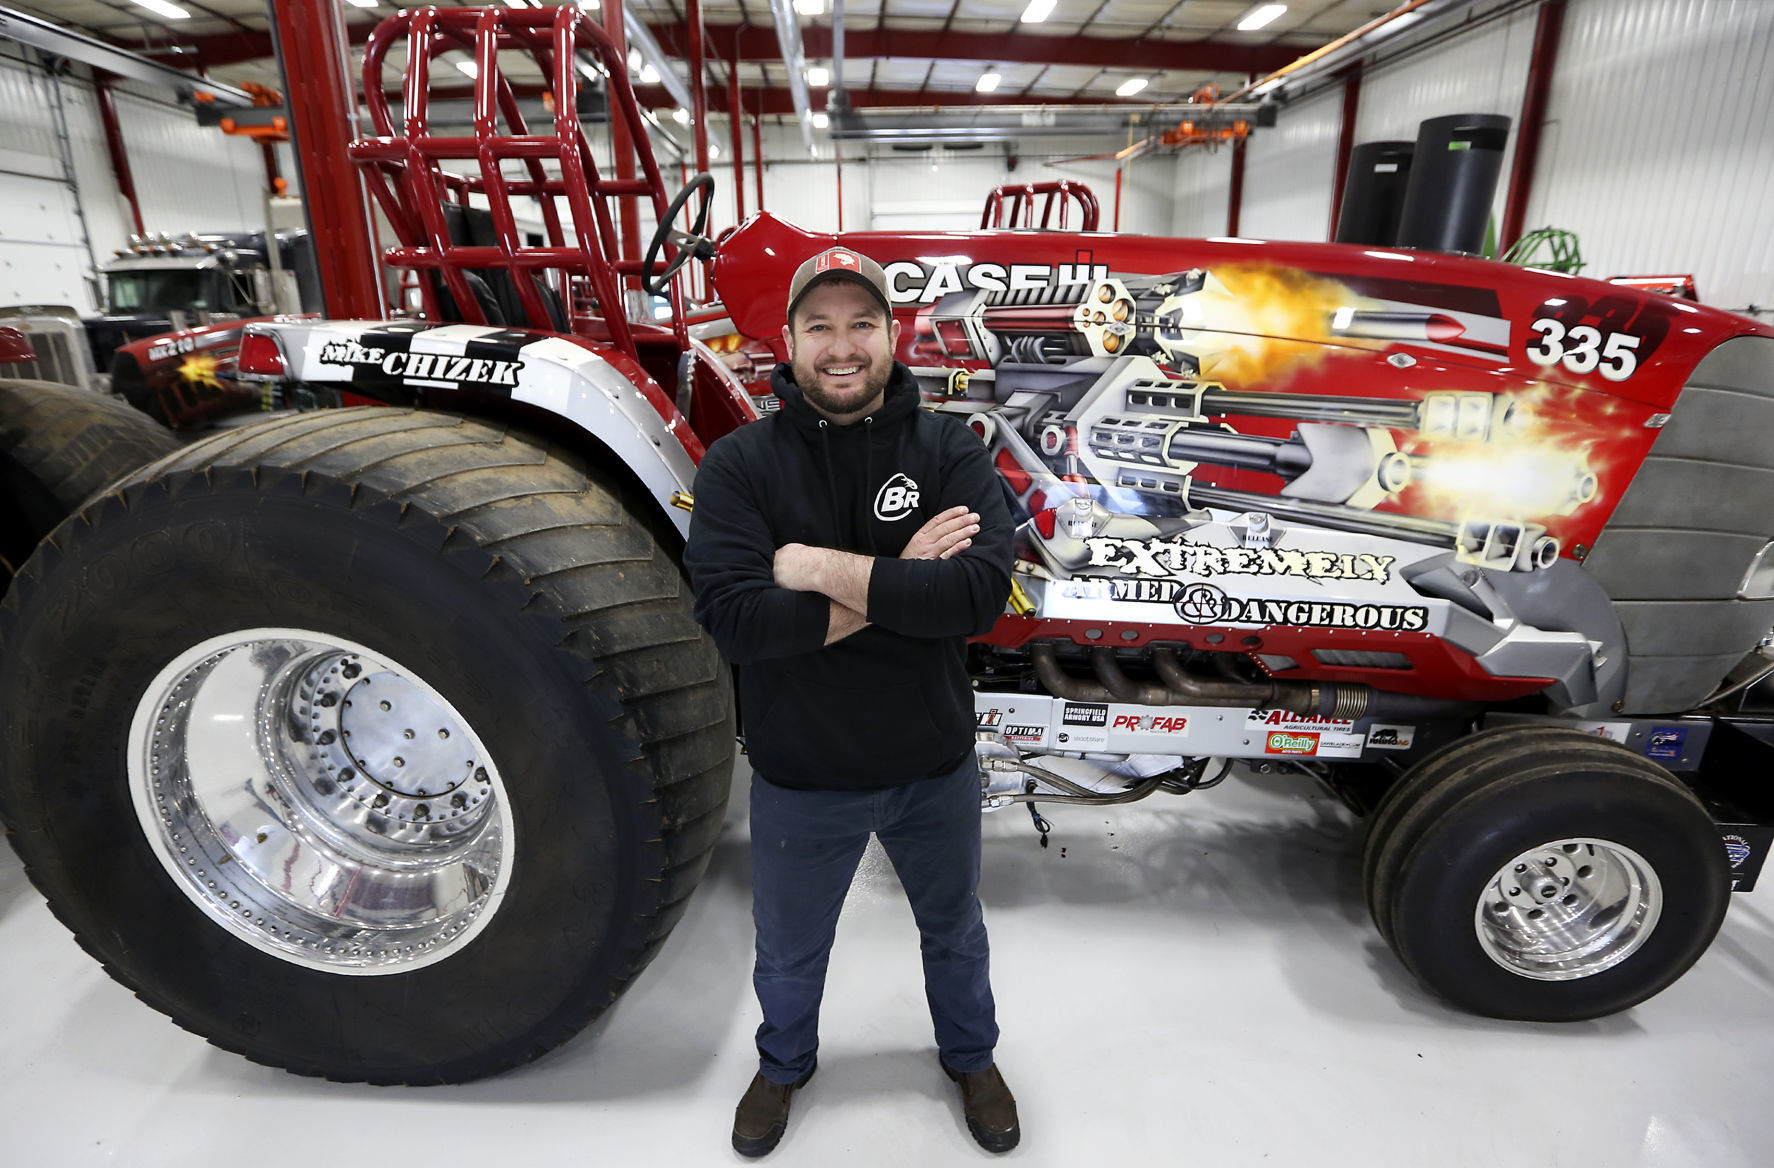 Josh Blackbourn is a co-owner of Blackbourn Racing Components with his father, Terry. The Cuba City, Wis., manufacturer creates the parts and builds tractors. Inspiration for the business came from Josh watching his dad prepare and compete in tractor pulls.    PHOTO CREDIT: NICKI KOHL